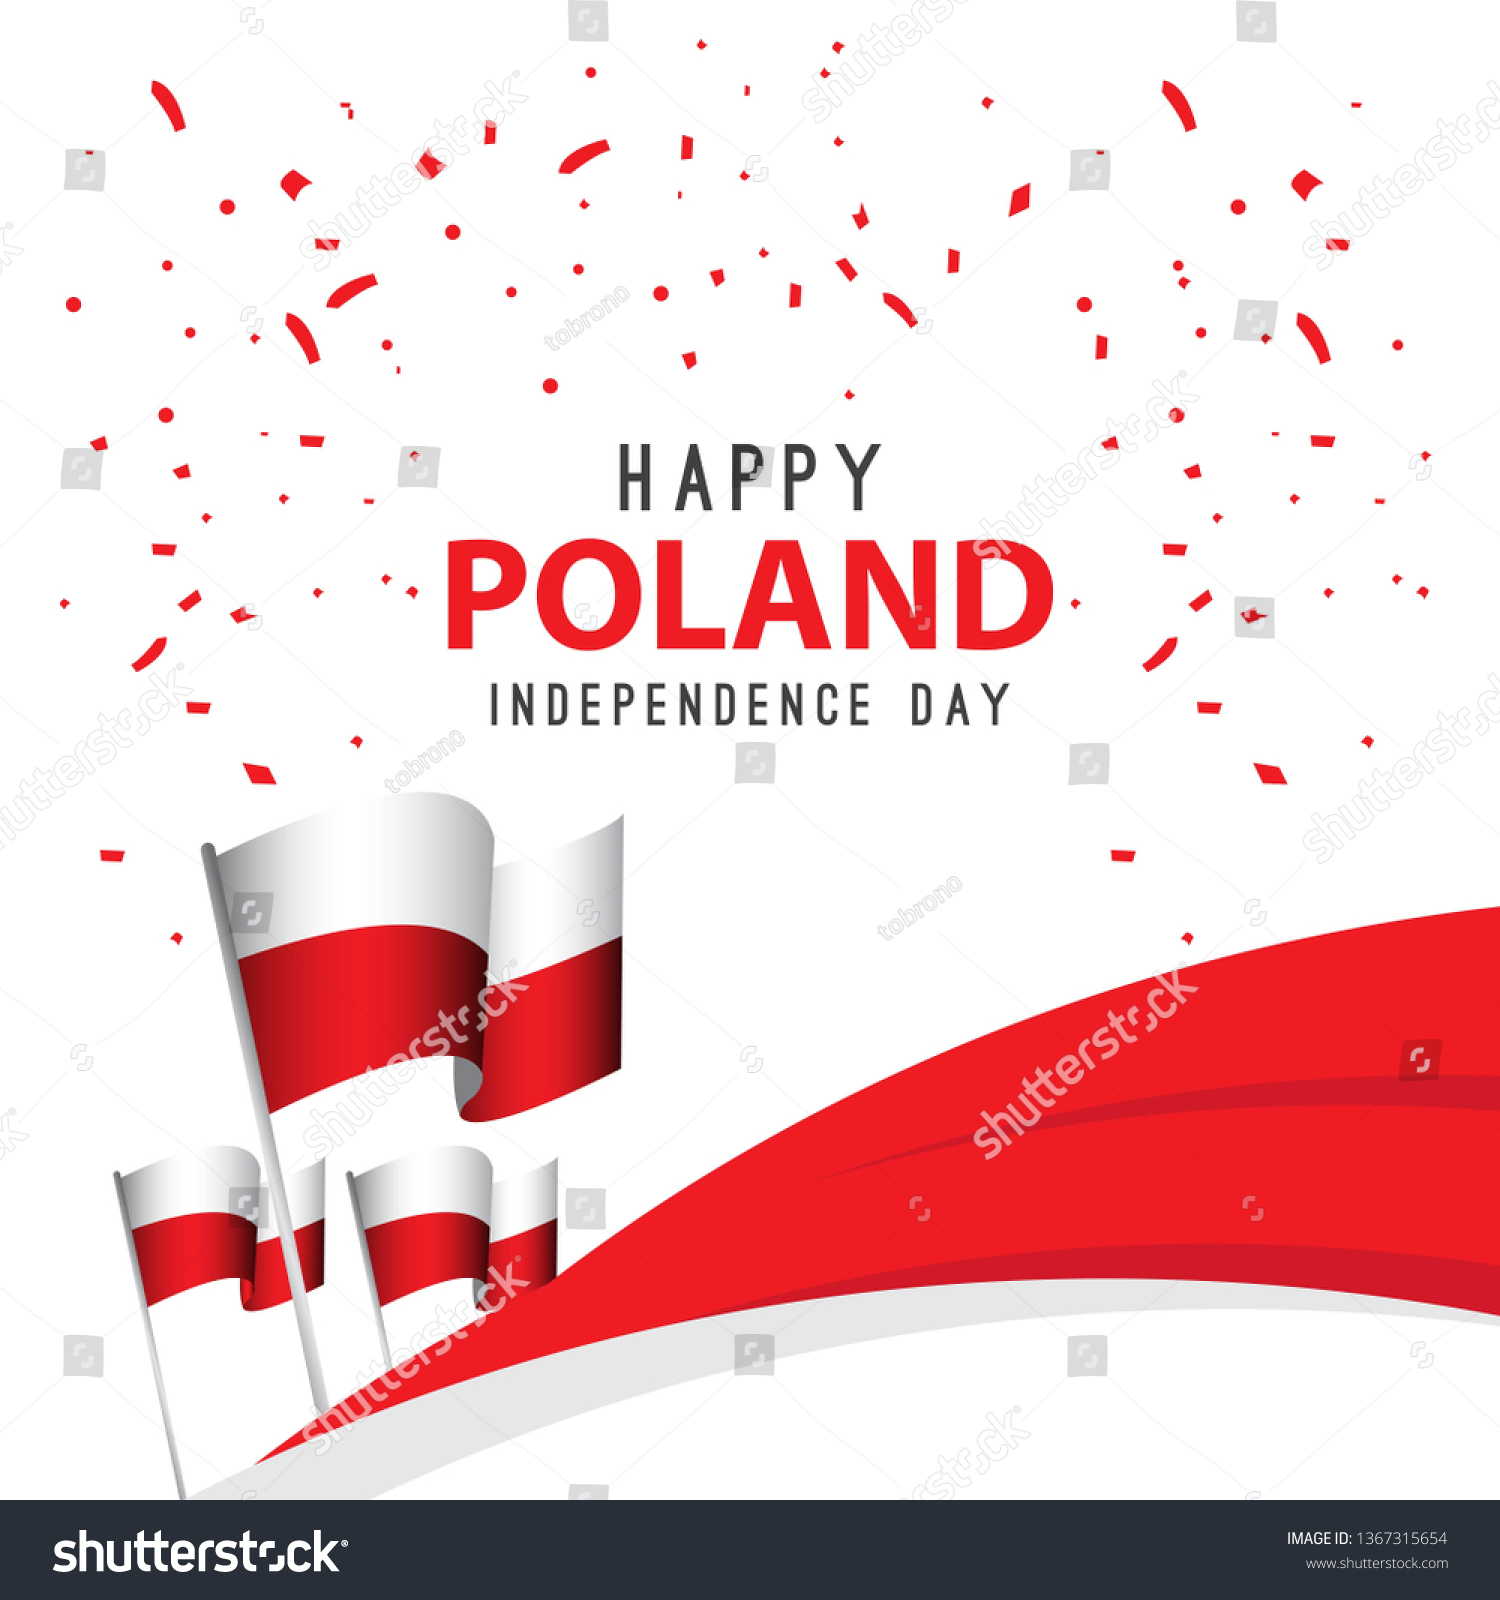 Happy Poland Independence Day Poster Vector Stock Vector (Royalty Free